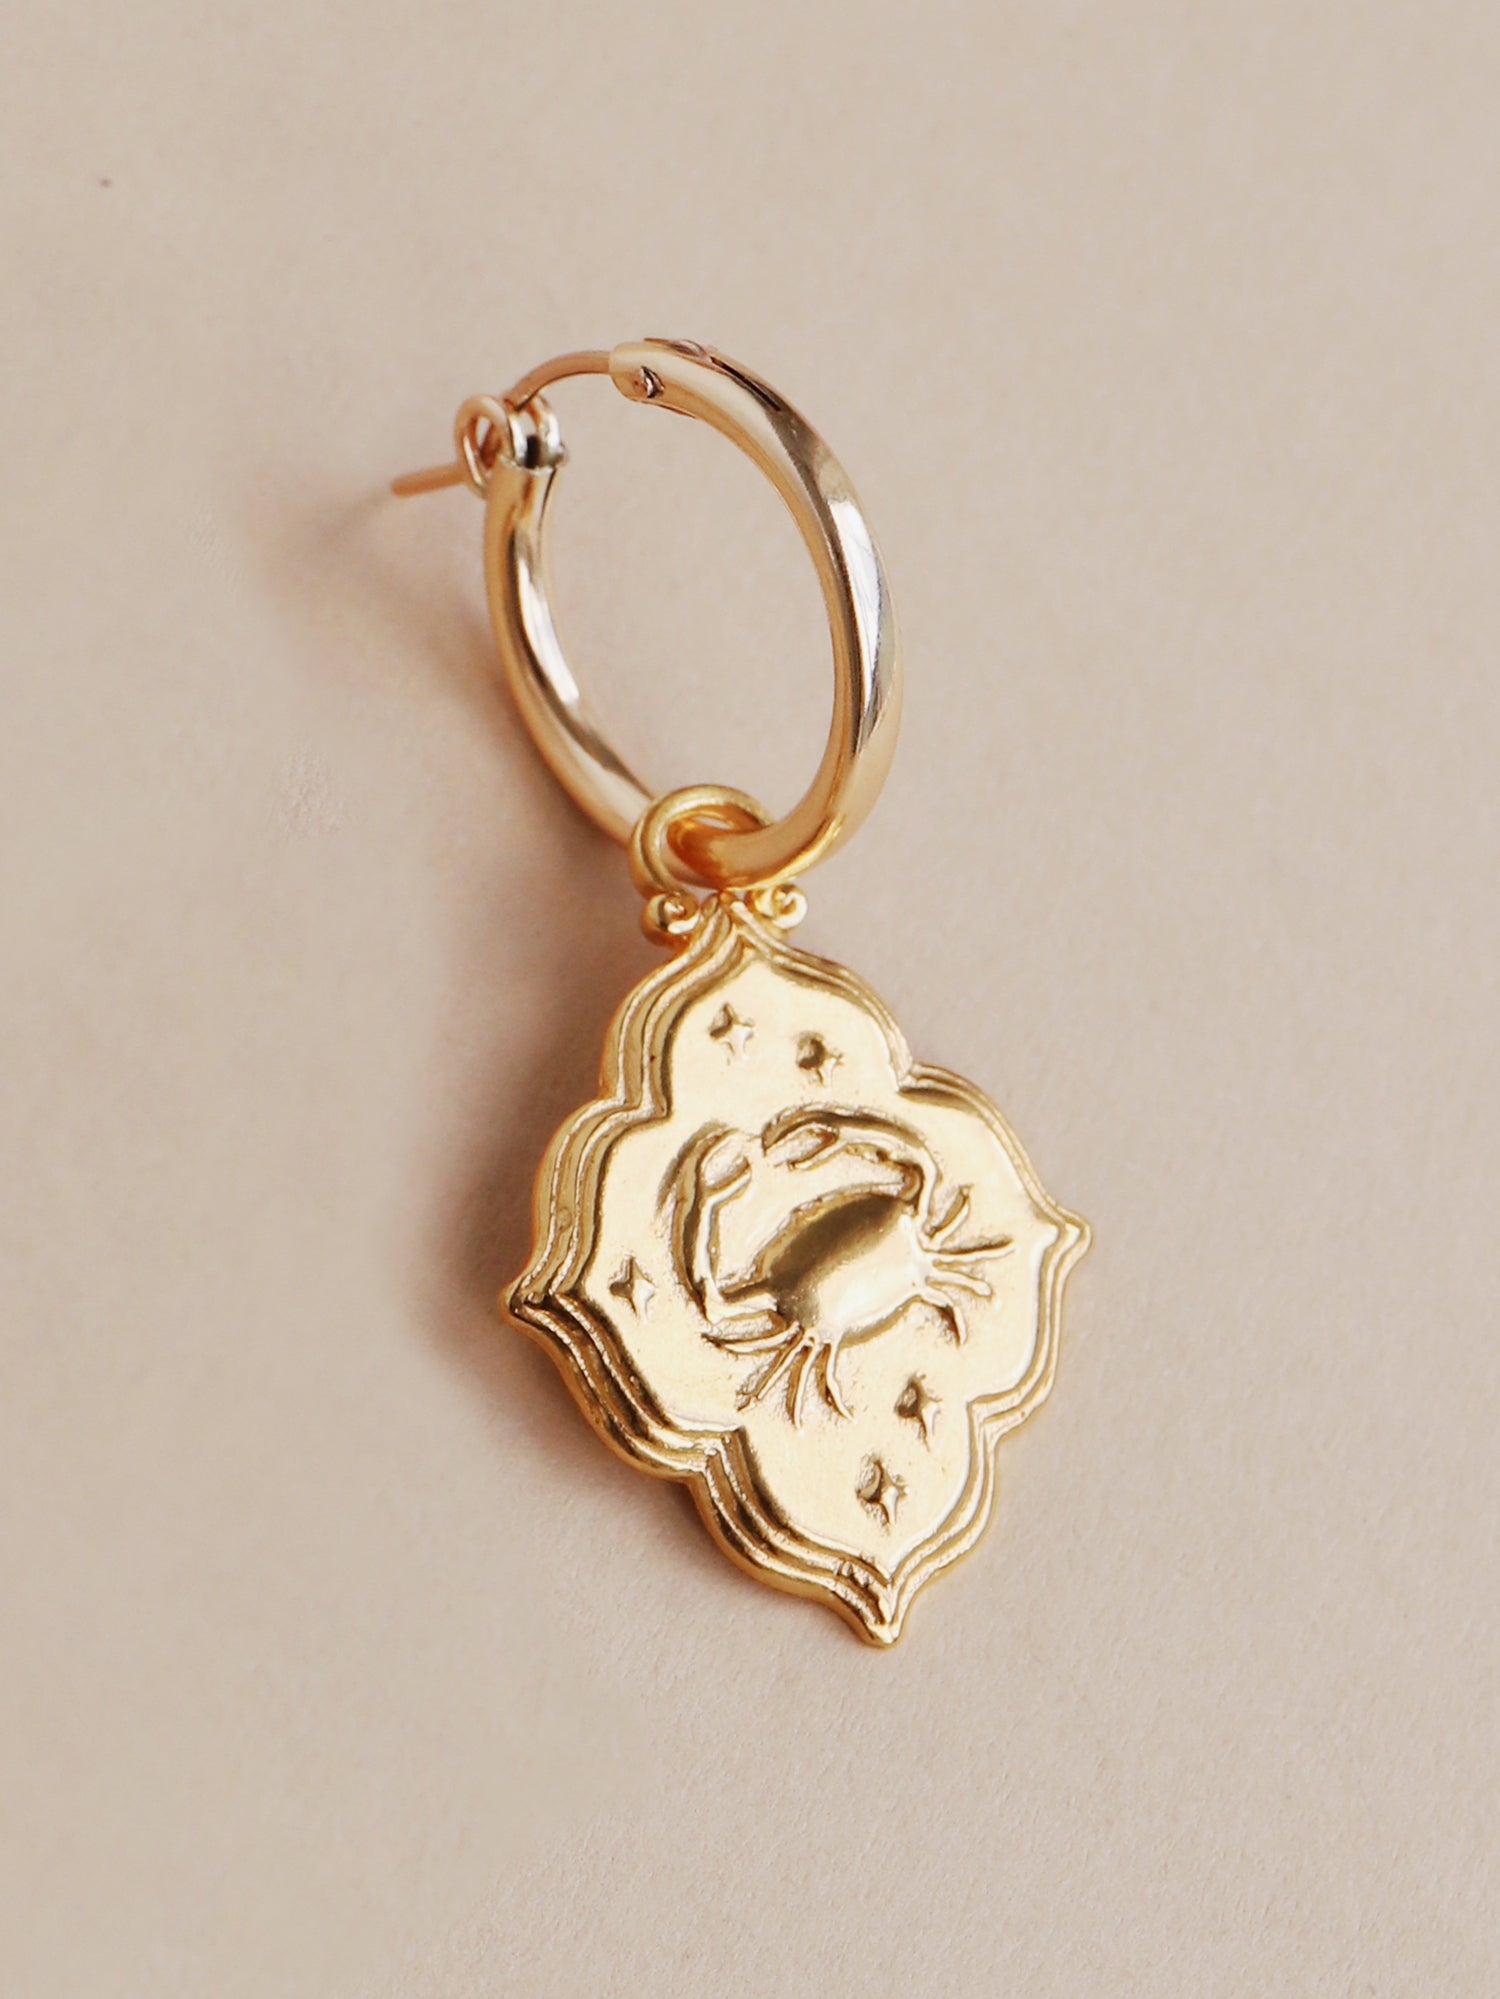 Cancer - Individual Charm in Gold